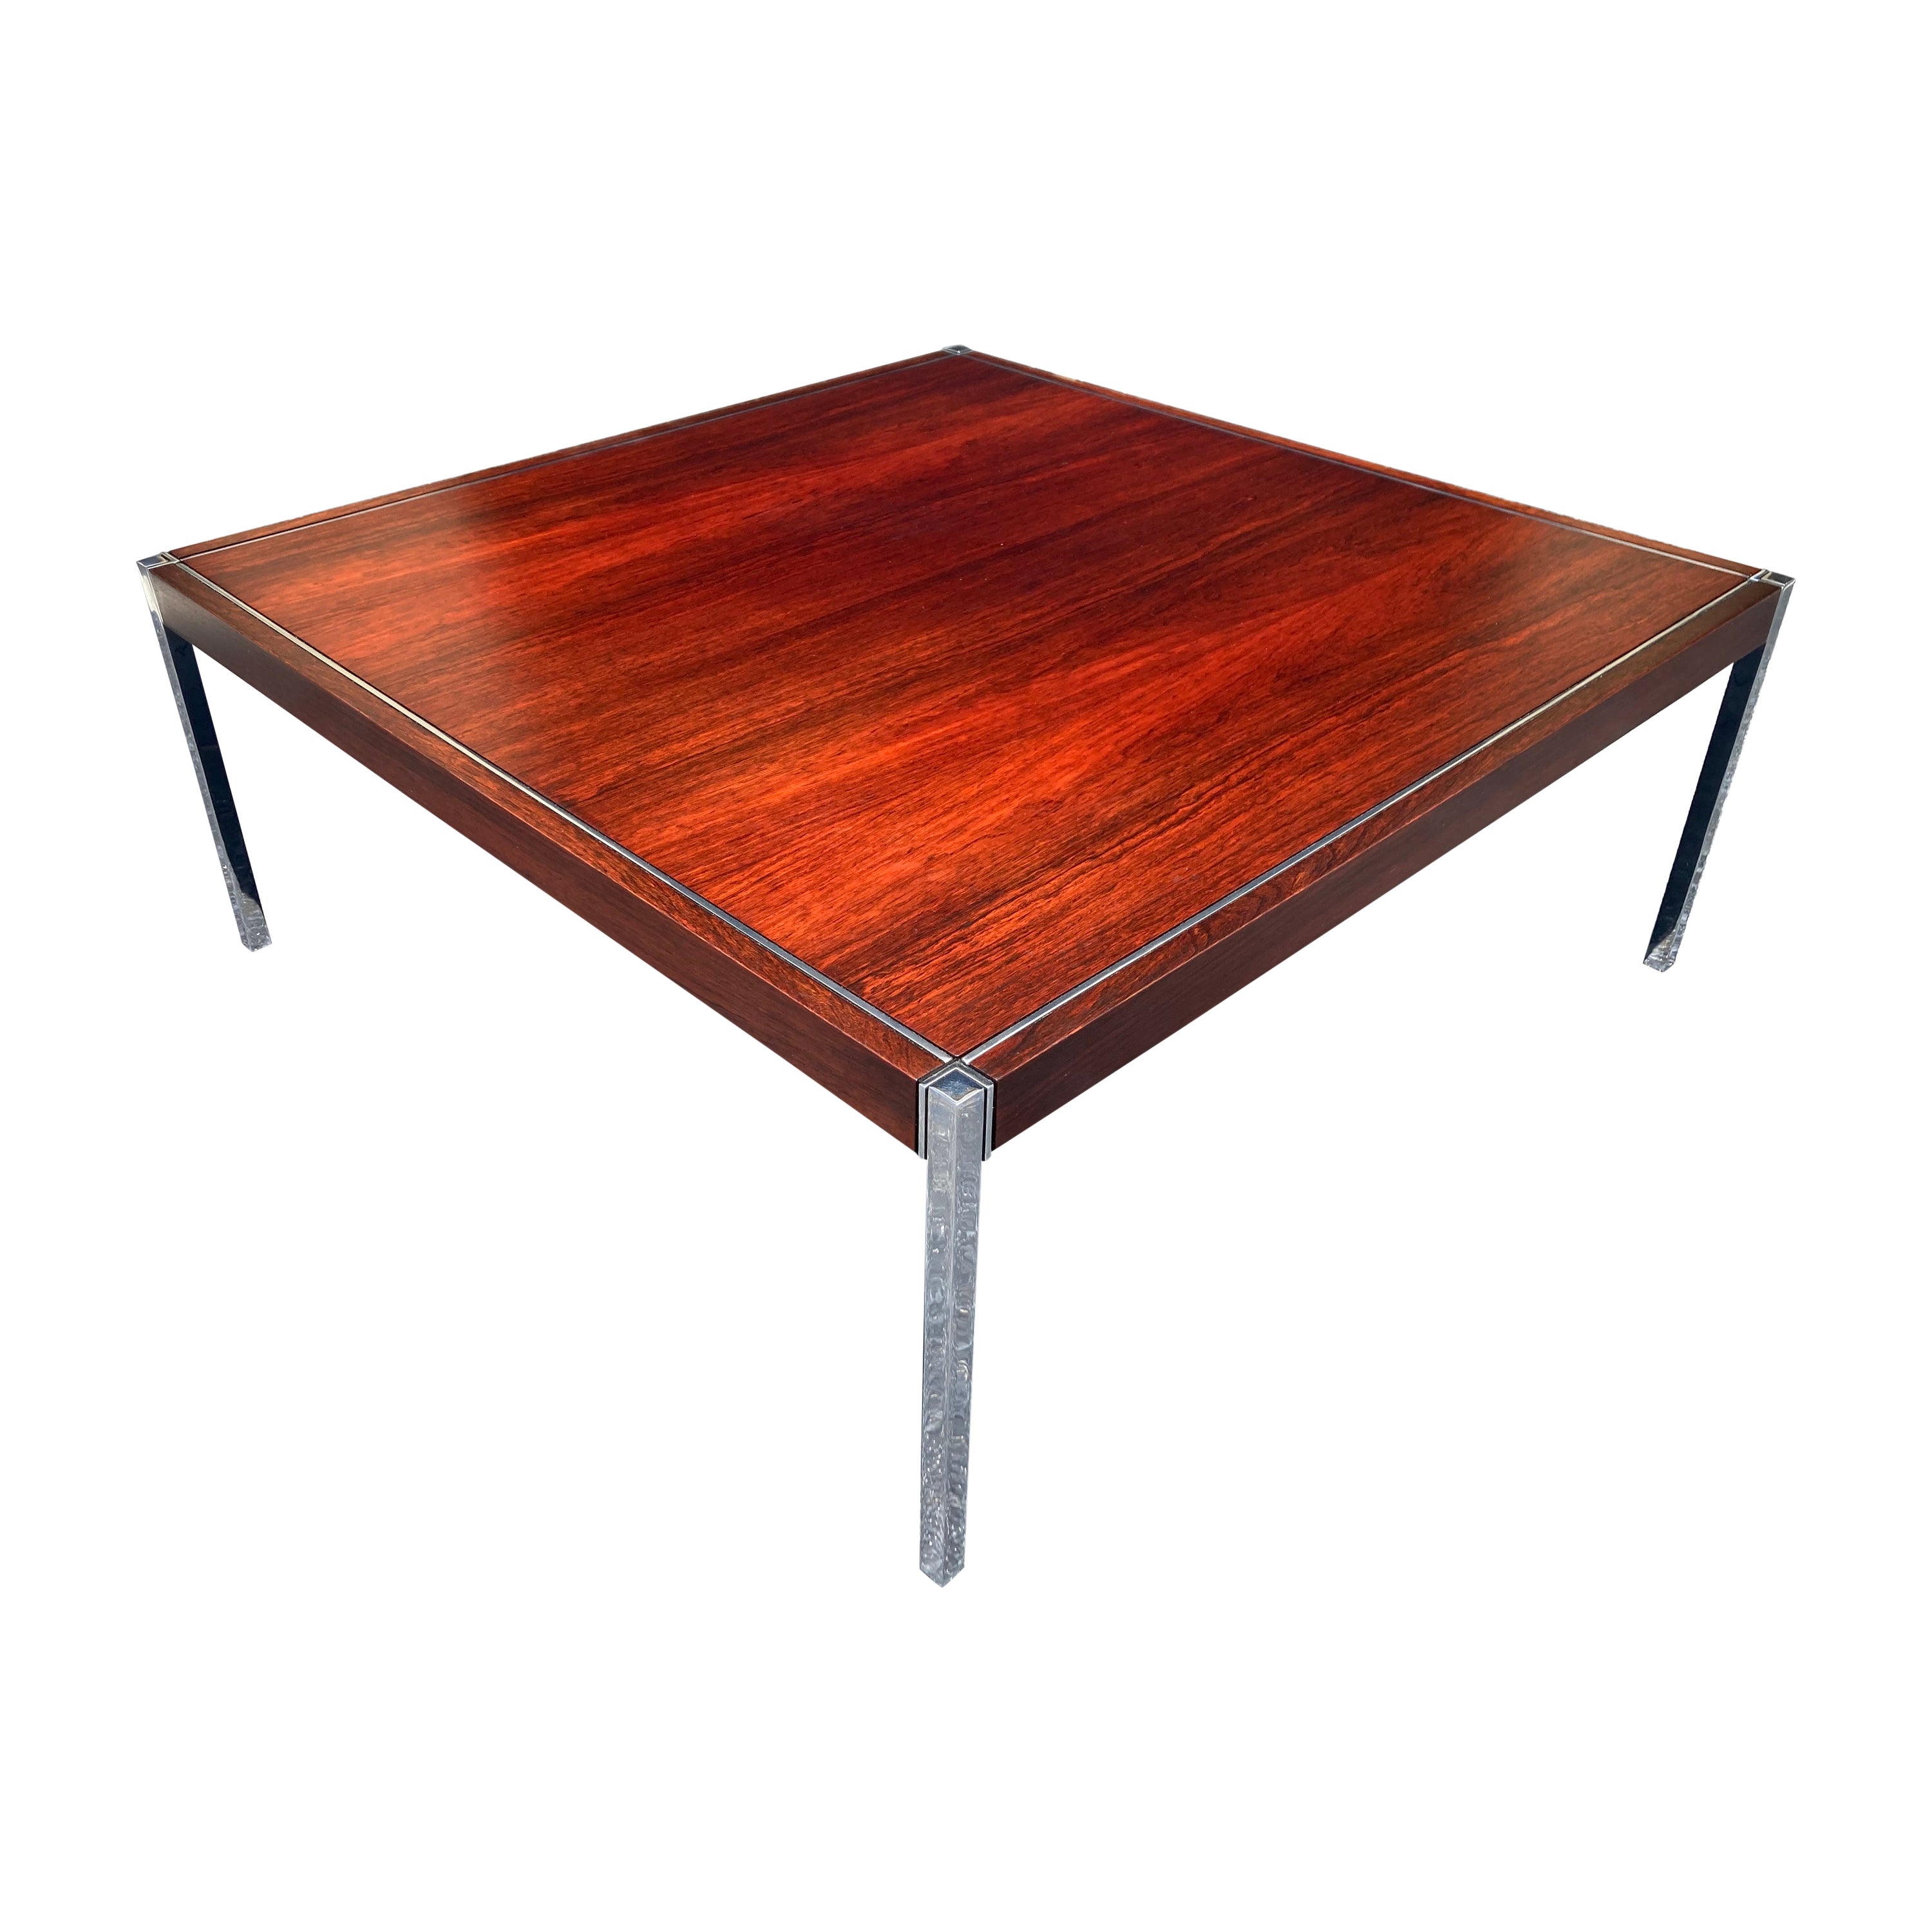 Original Richard Schultz Rosewood Coffee Table for Knoll, 1970s